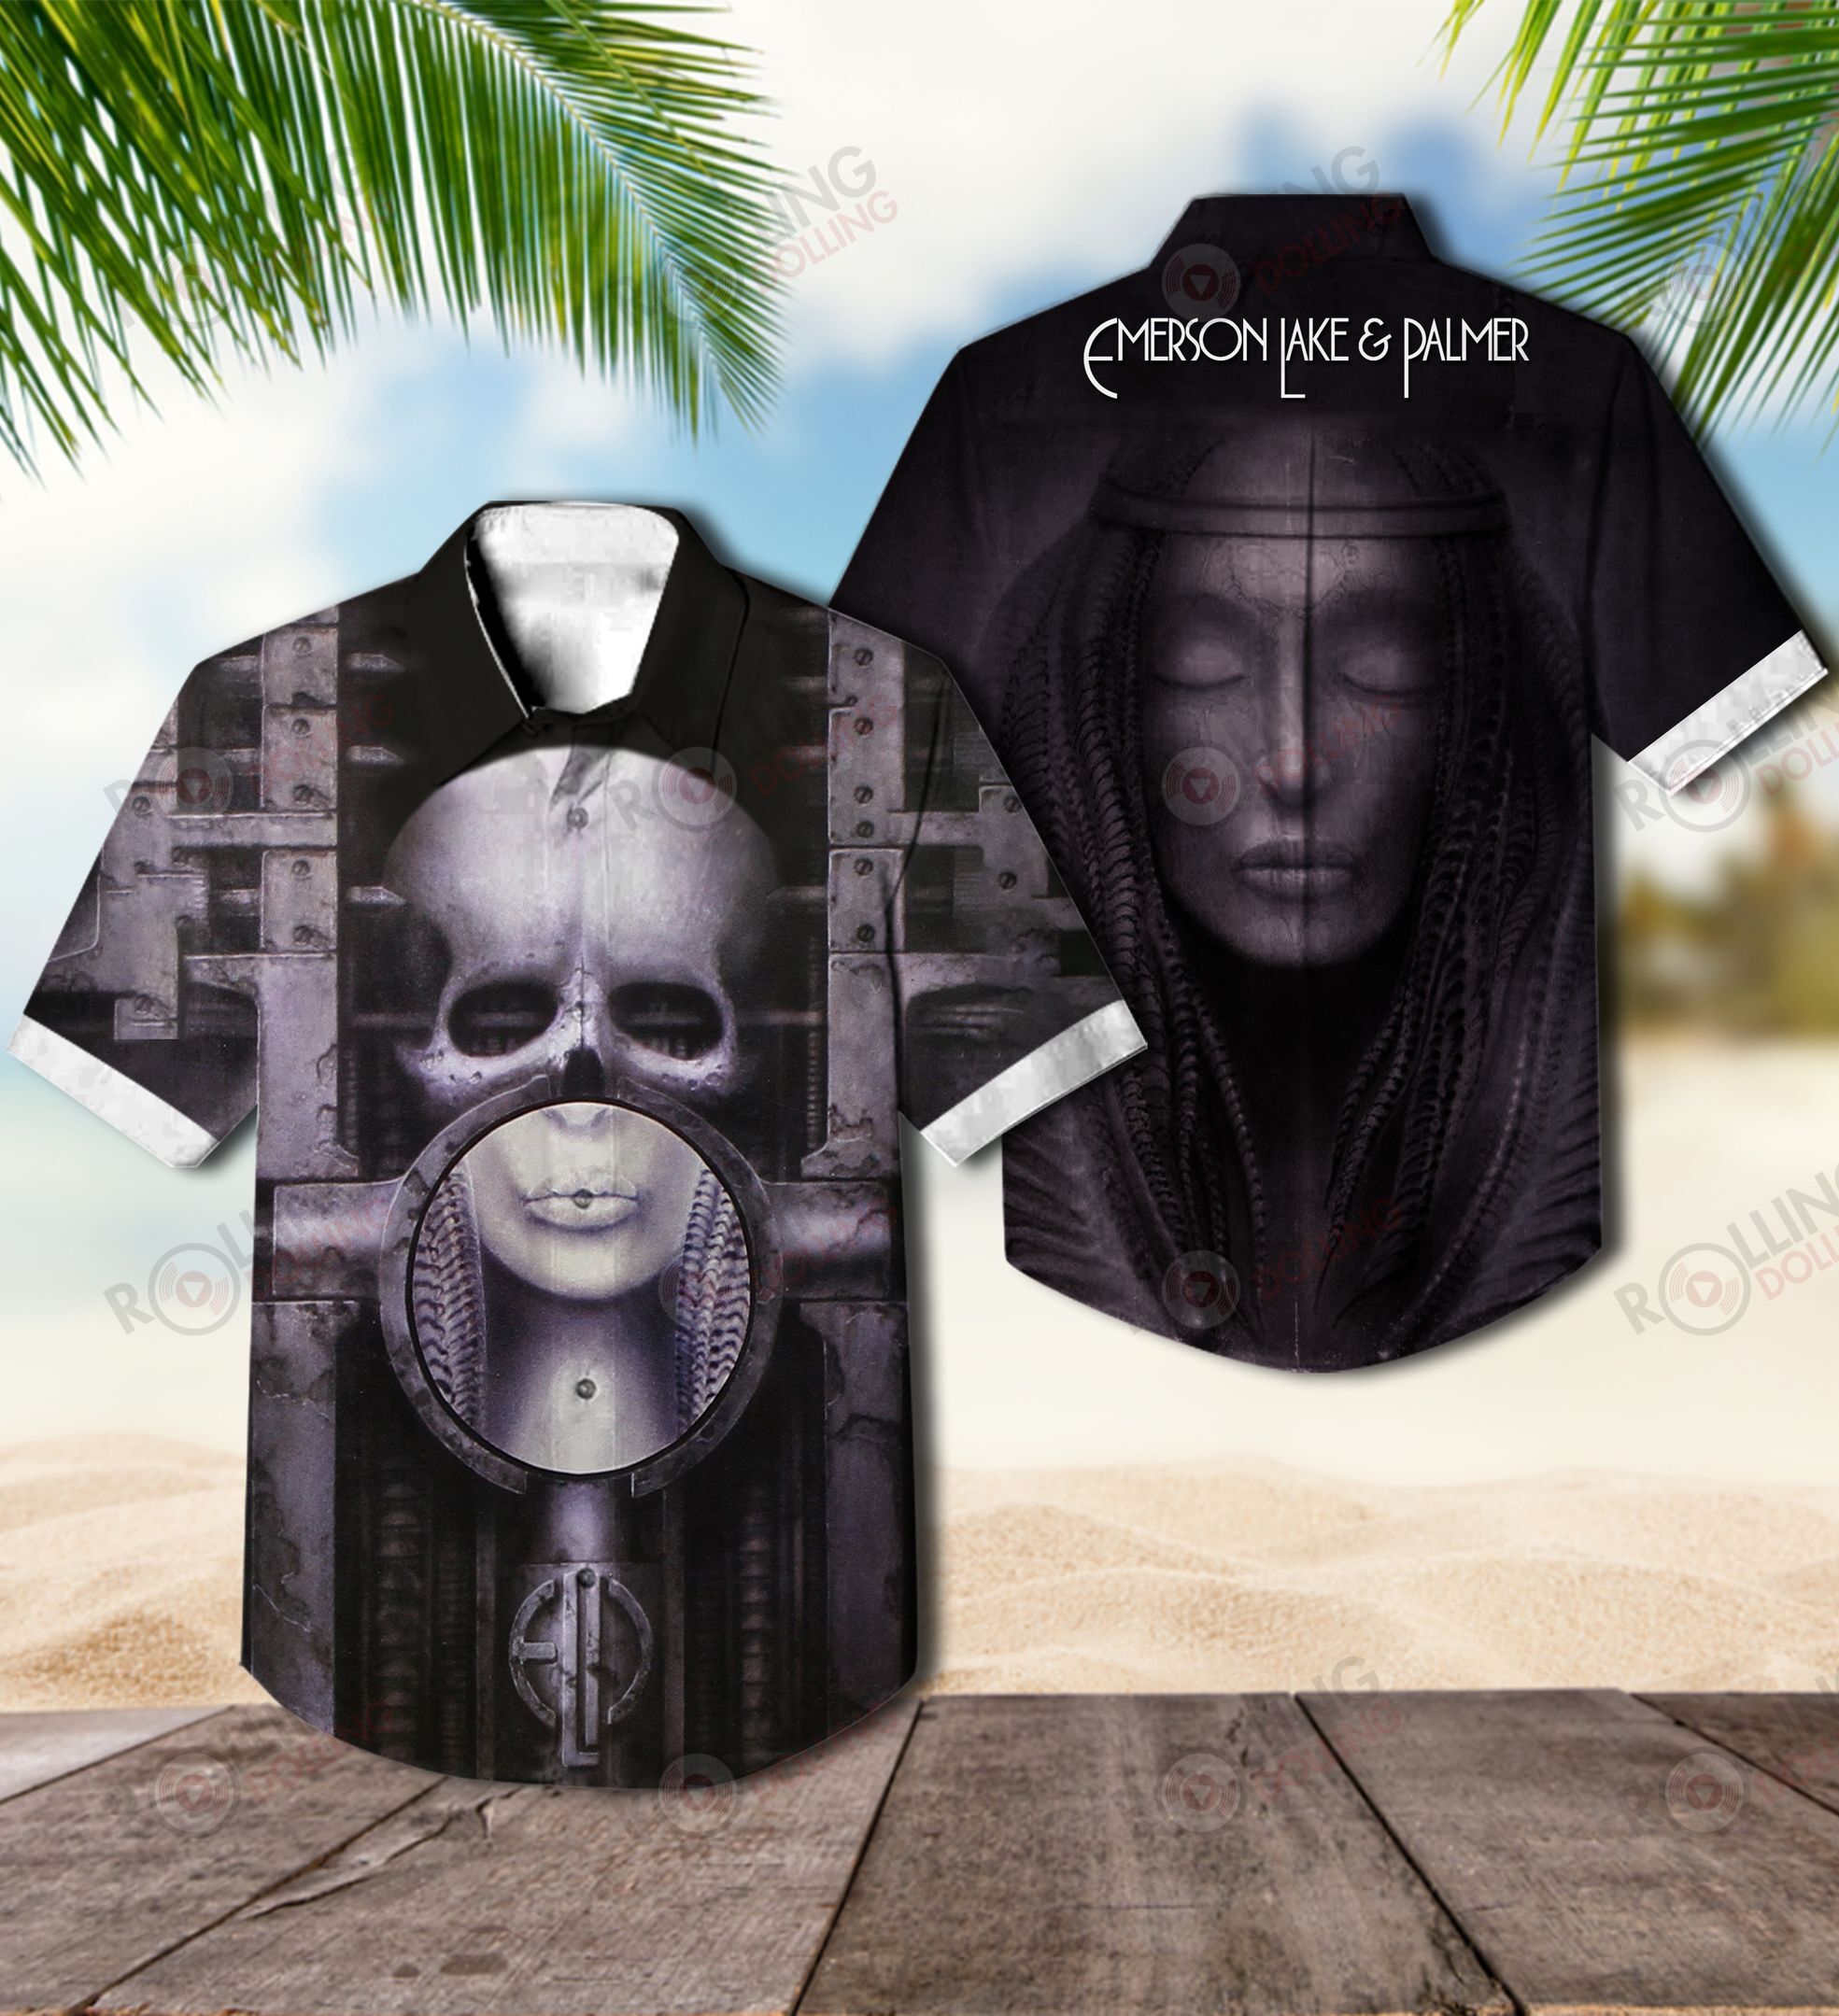 This would make a great gift for any fan who loves Hawaiian Shirt as well as Rock band 47